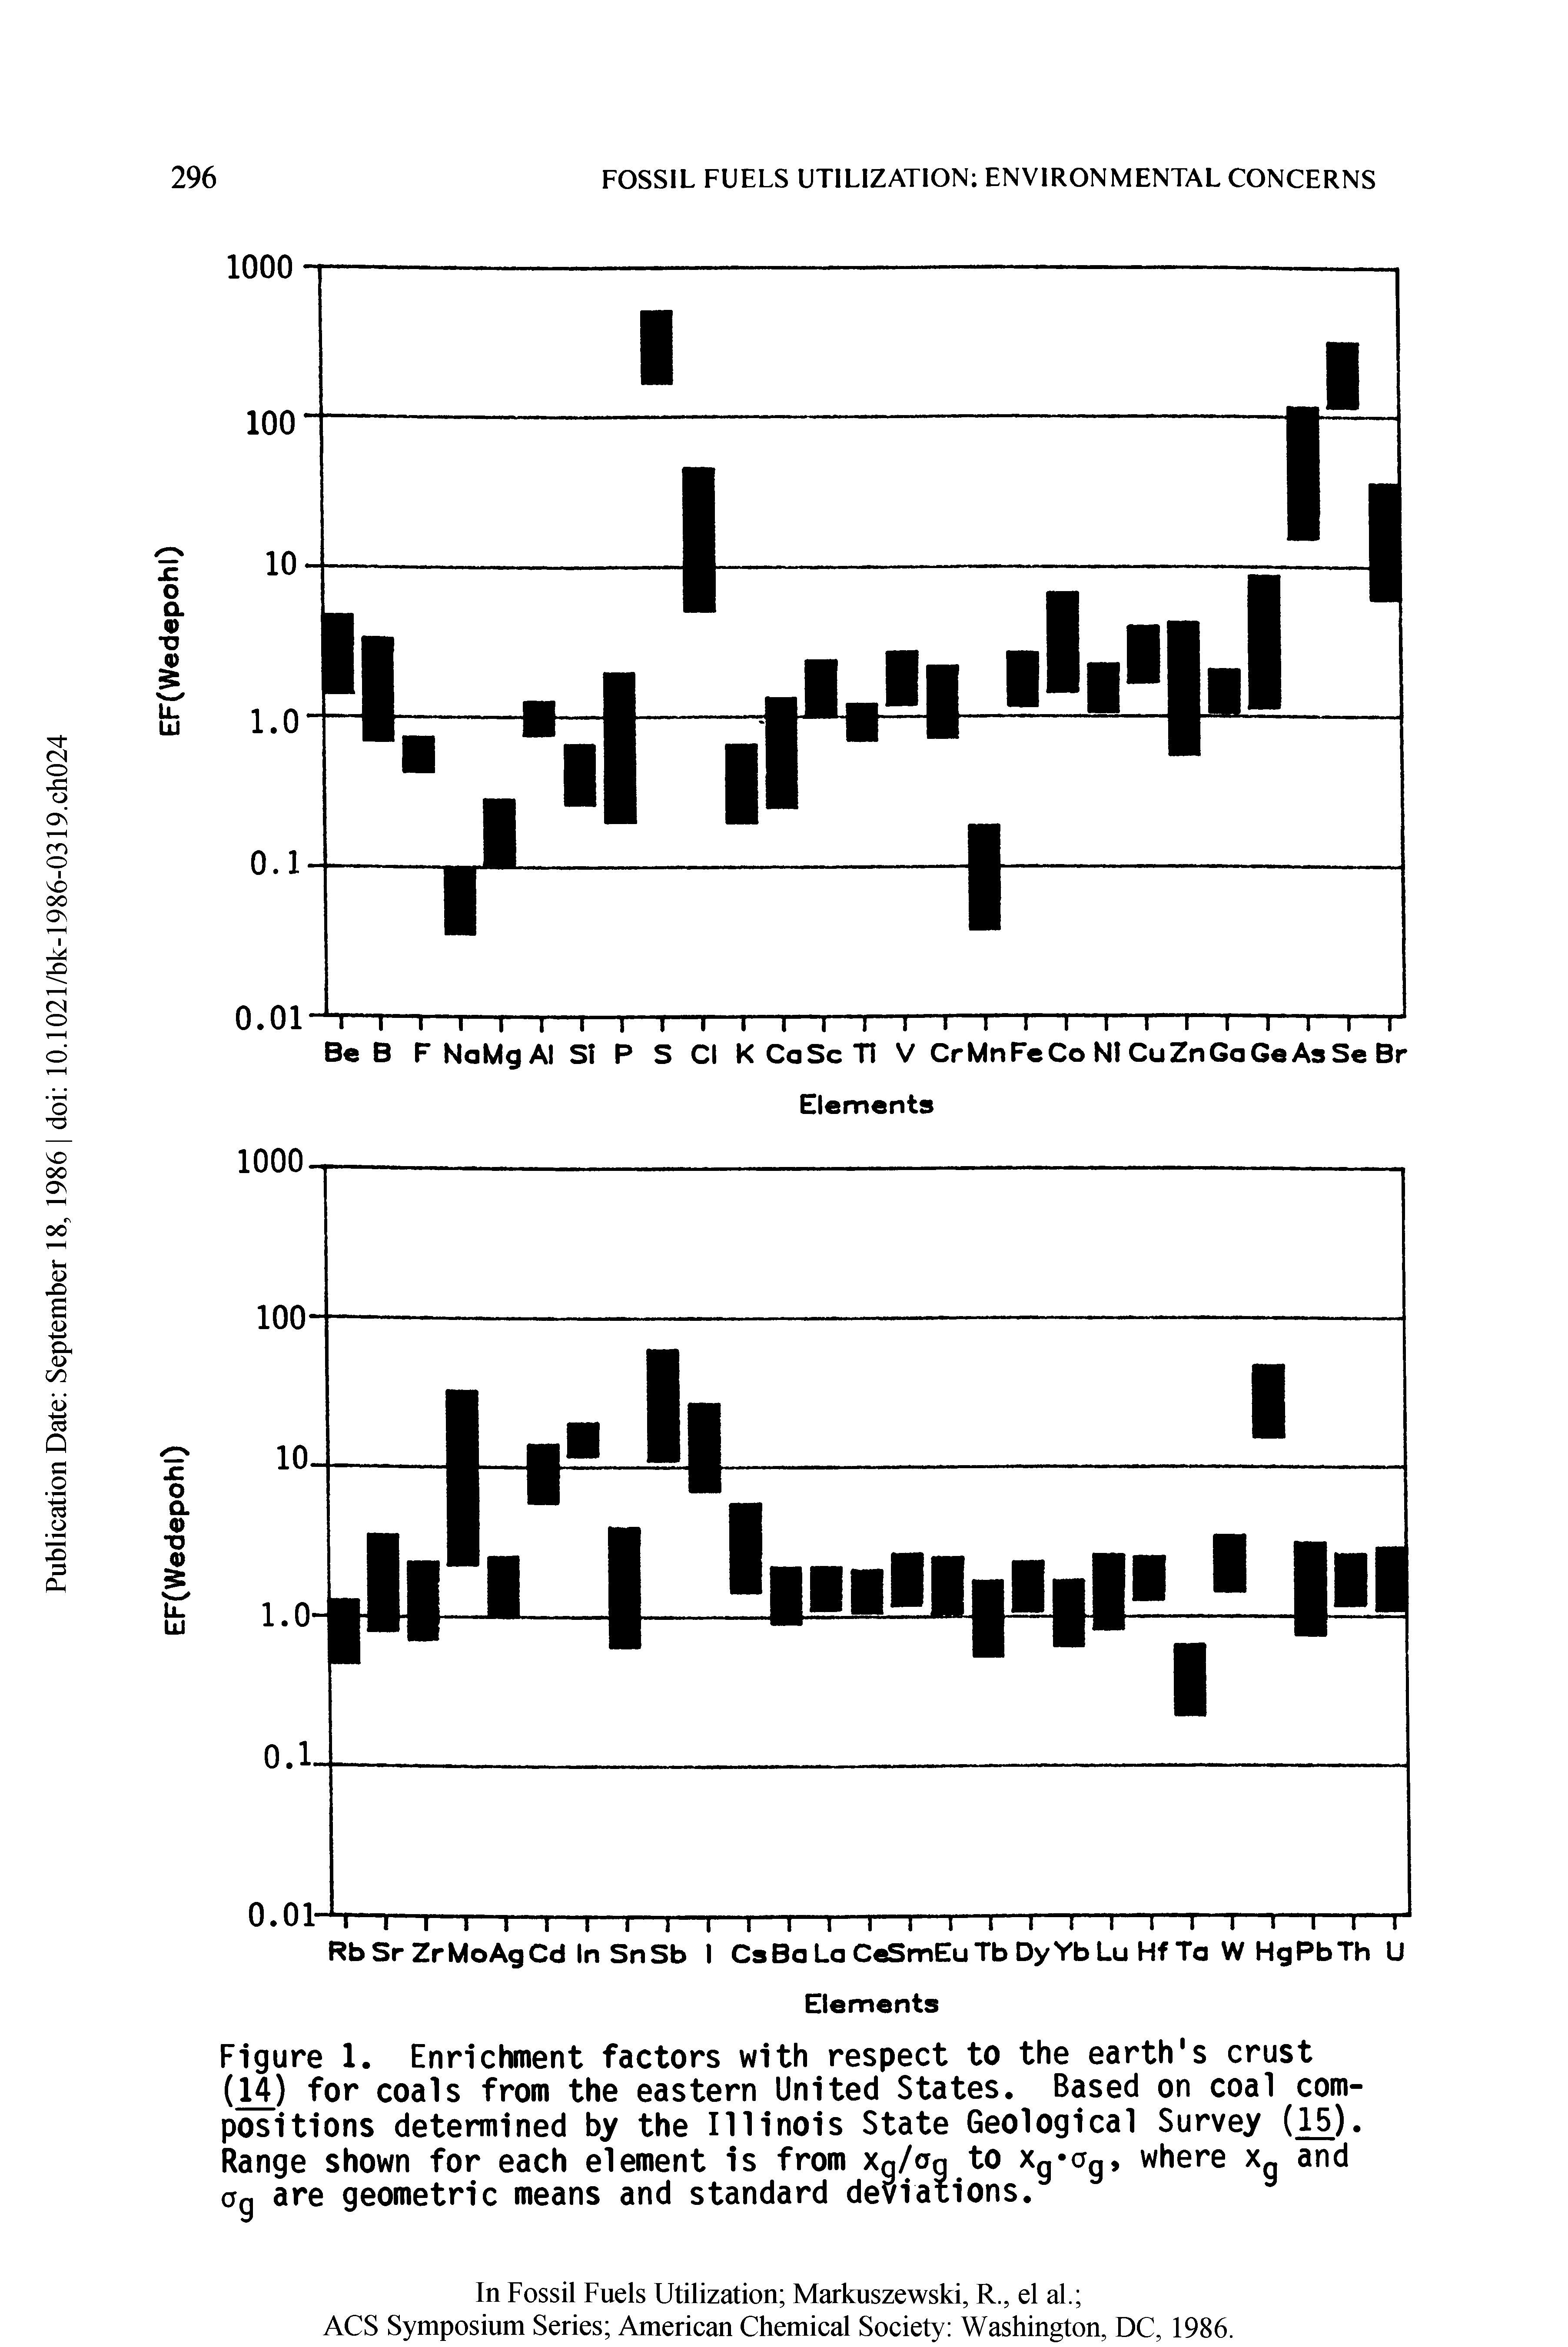 Figure 1. Enrichment factors with respect to the earth s crust (14) for coals from the eastern United States. Based on coal compositions determined by the Illinois State Geological Survey (15). Range shown for each element is from Xg/ag to xg-ag, where xg and ag are geometric means and standard deviations.